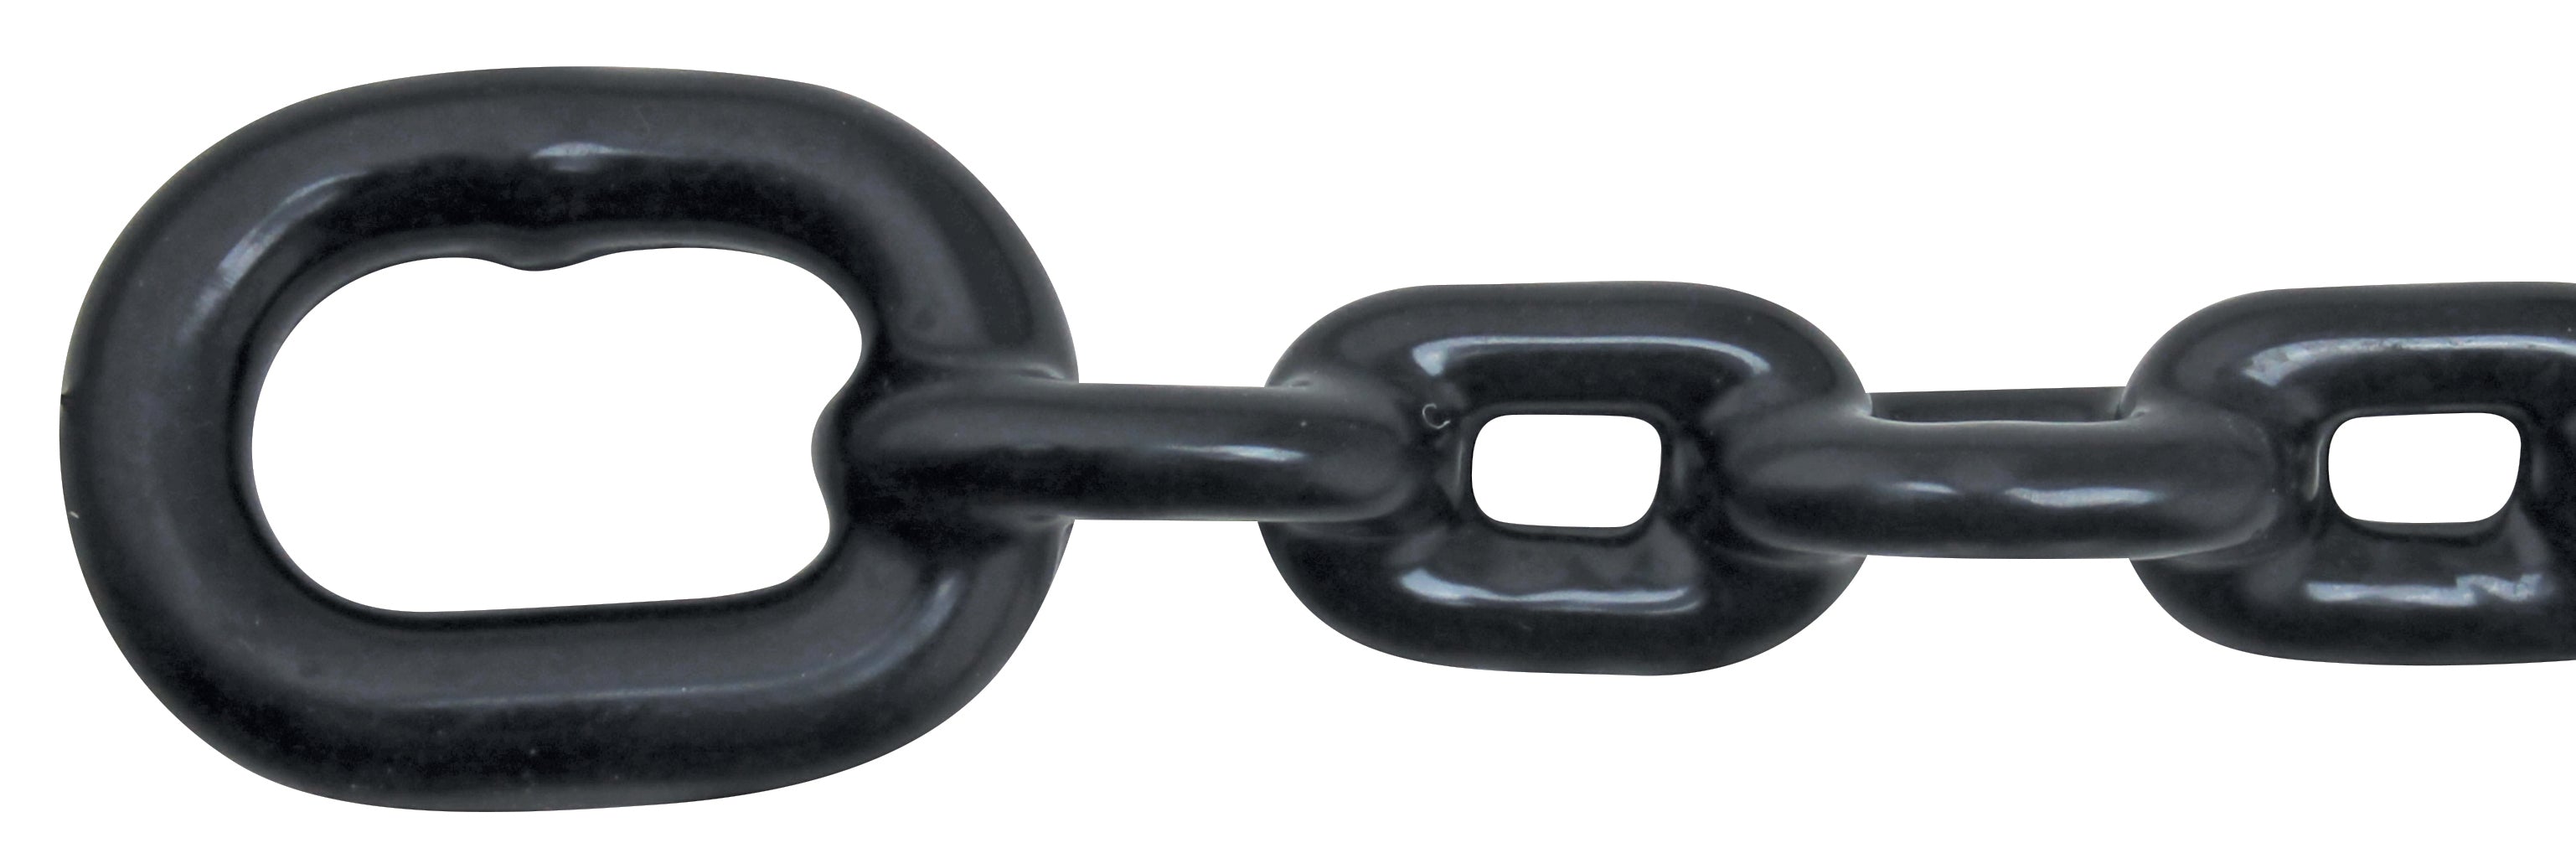 Extreme Max 3006.6593 BoatTector PVC-Coated Anchor Lead Chain - 3/16" x 4', Black